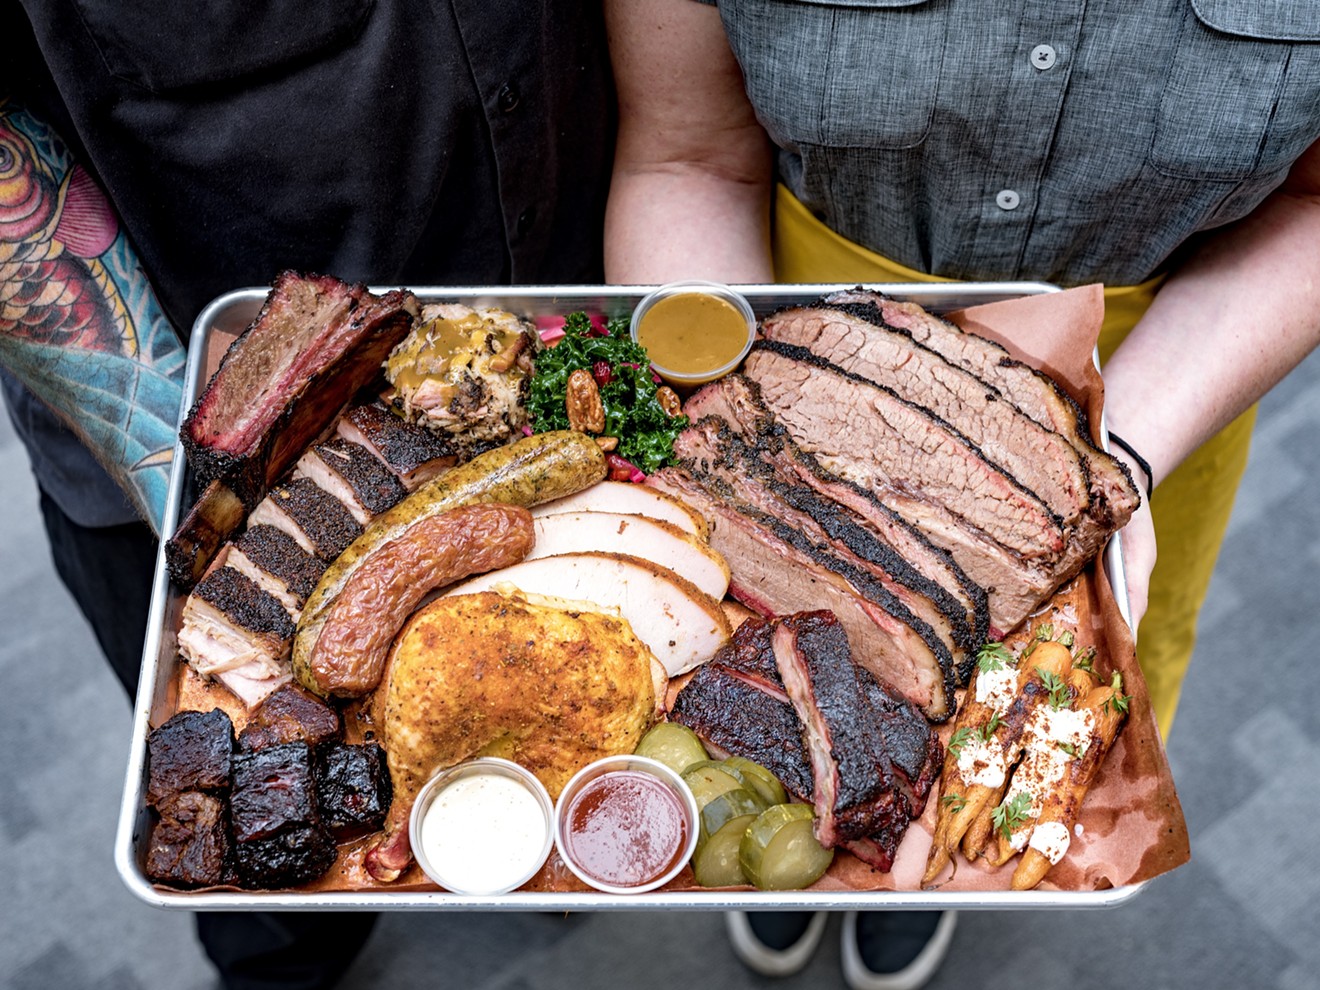 The newly opened Feges BBQ is one of the hot spots set to beef up the Houston Barbecue Festival.